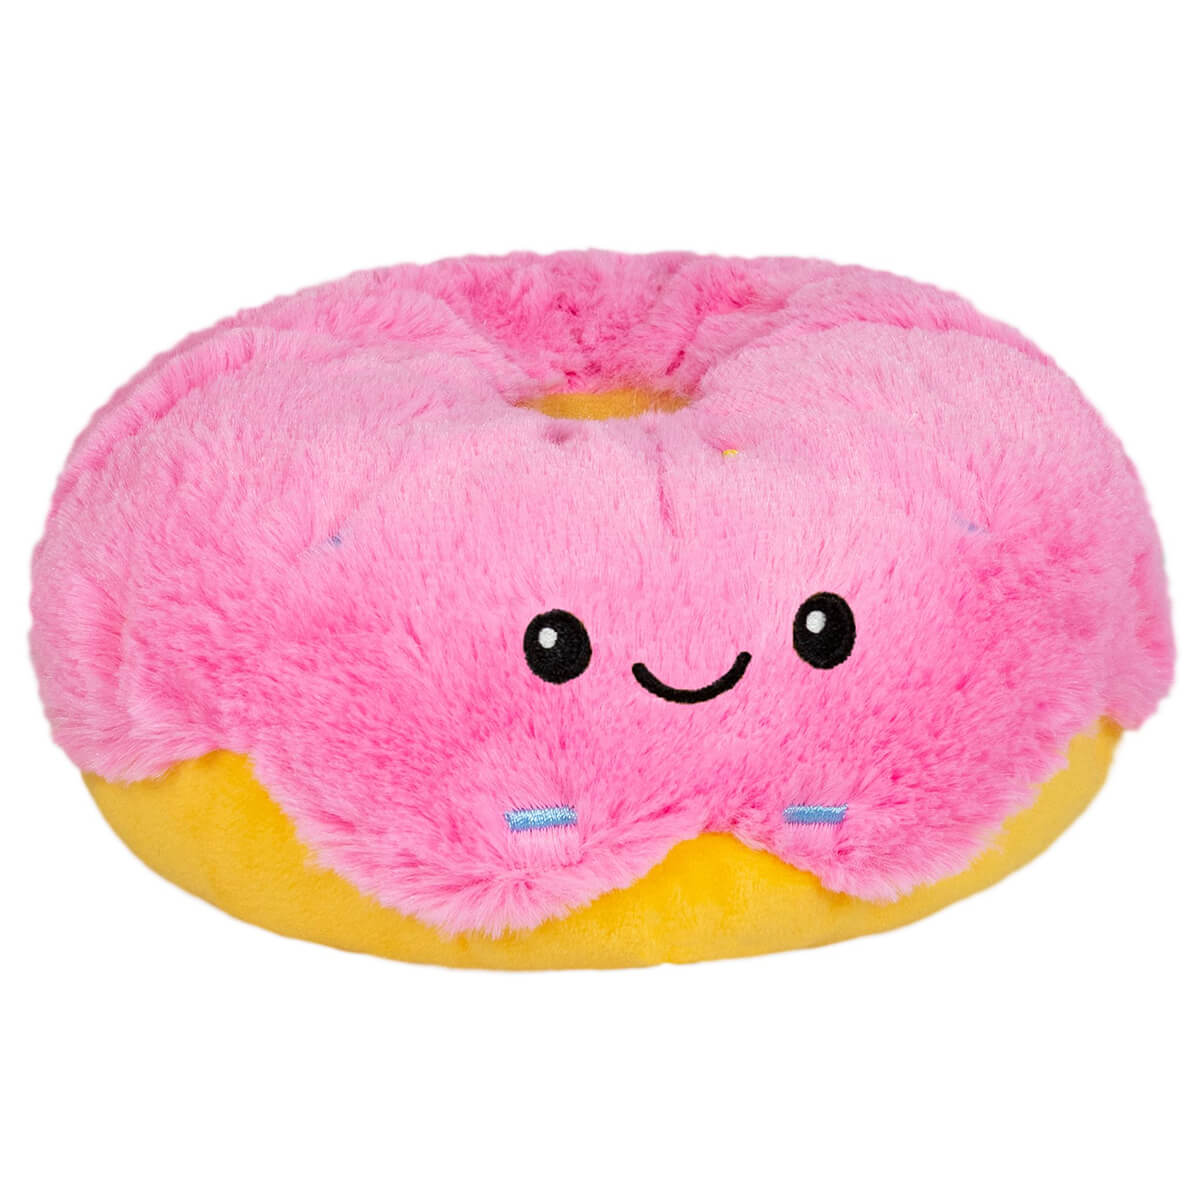 Snegglemi Snackers Pink Donut from Squishables has a cute smiley face.